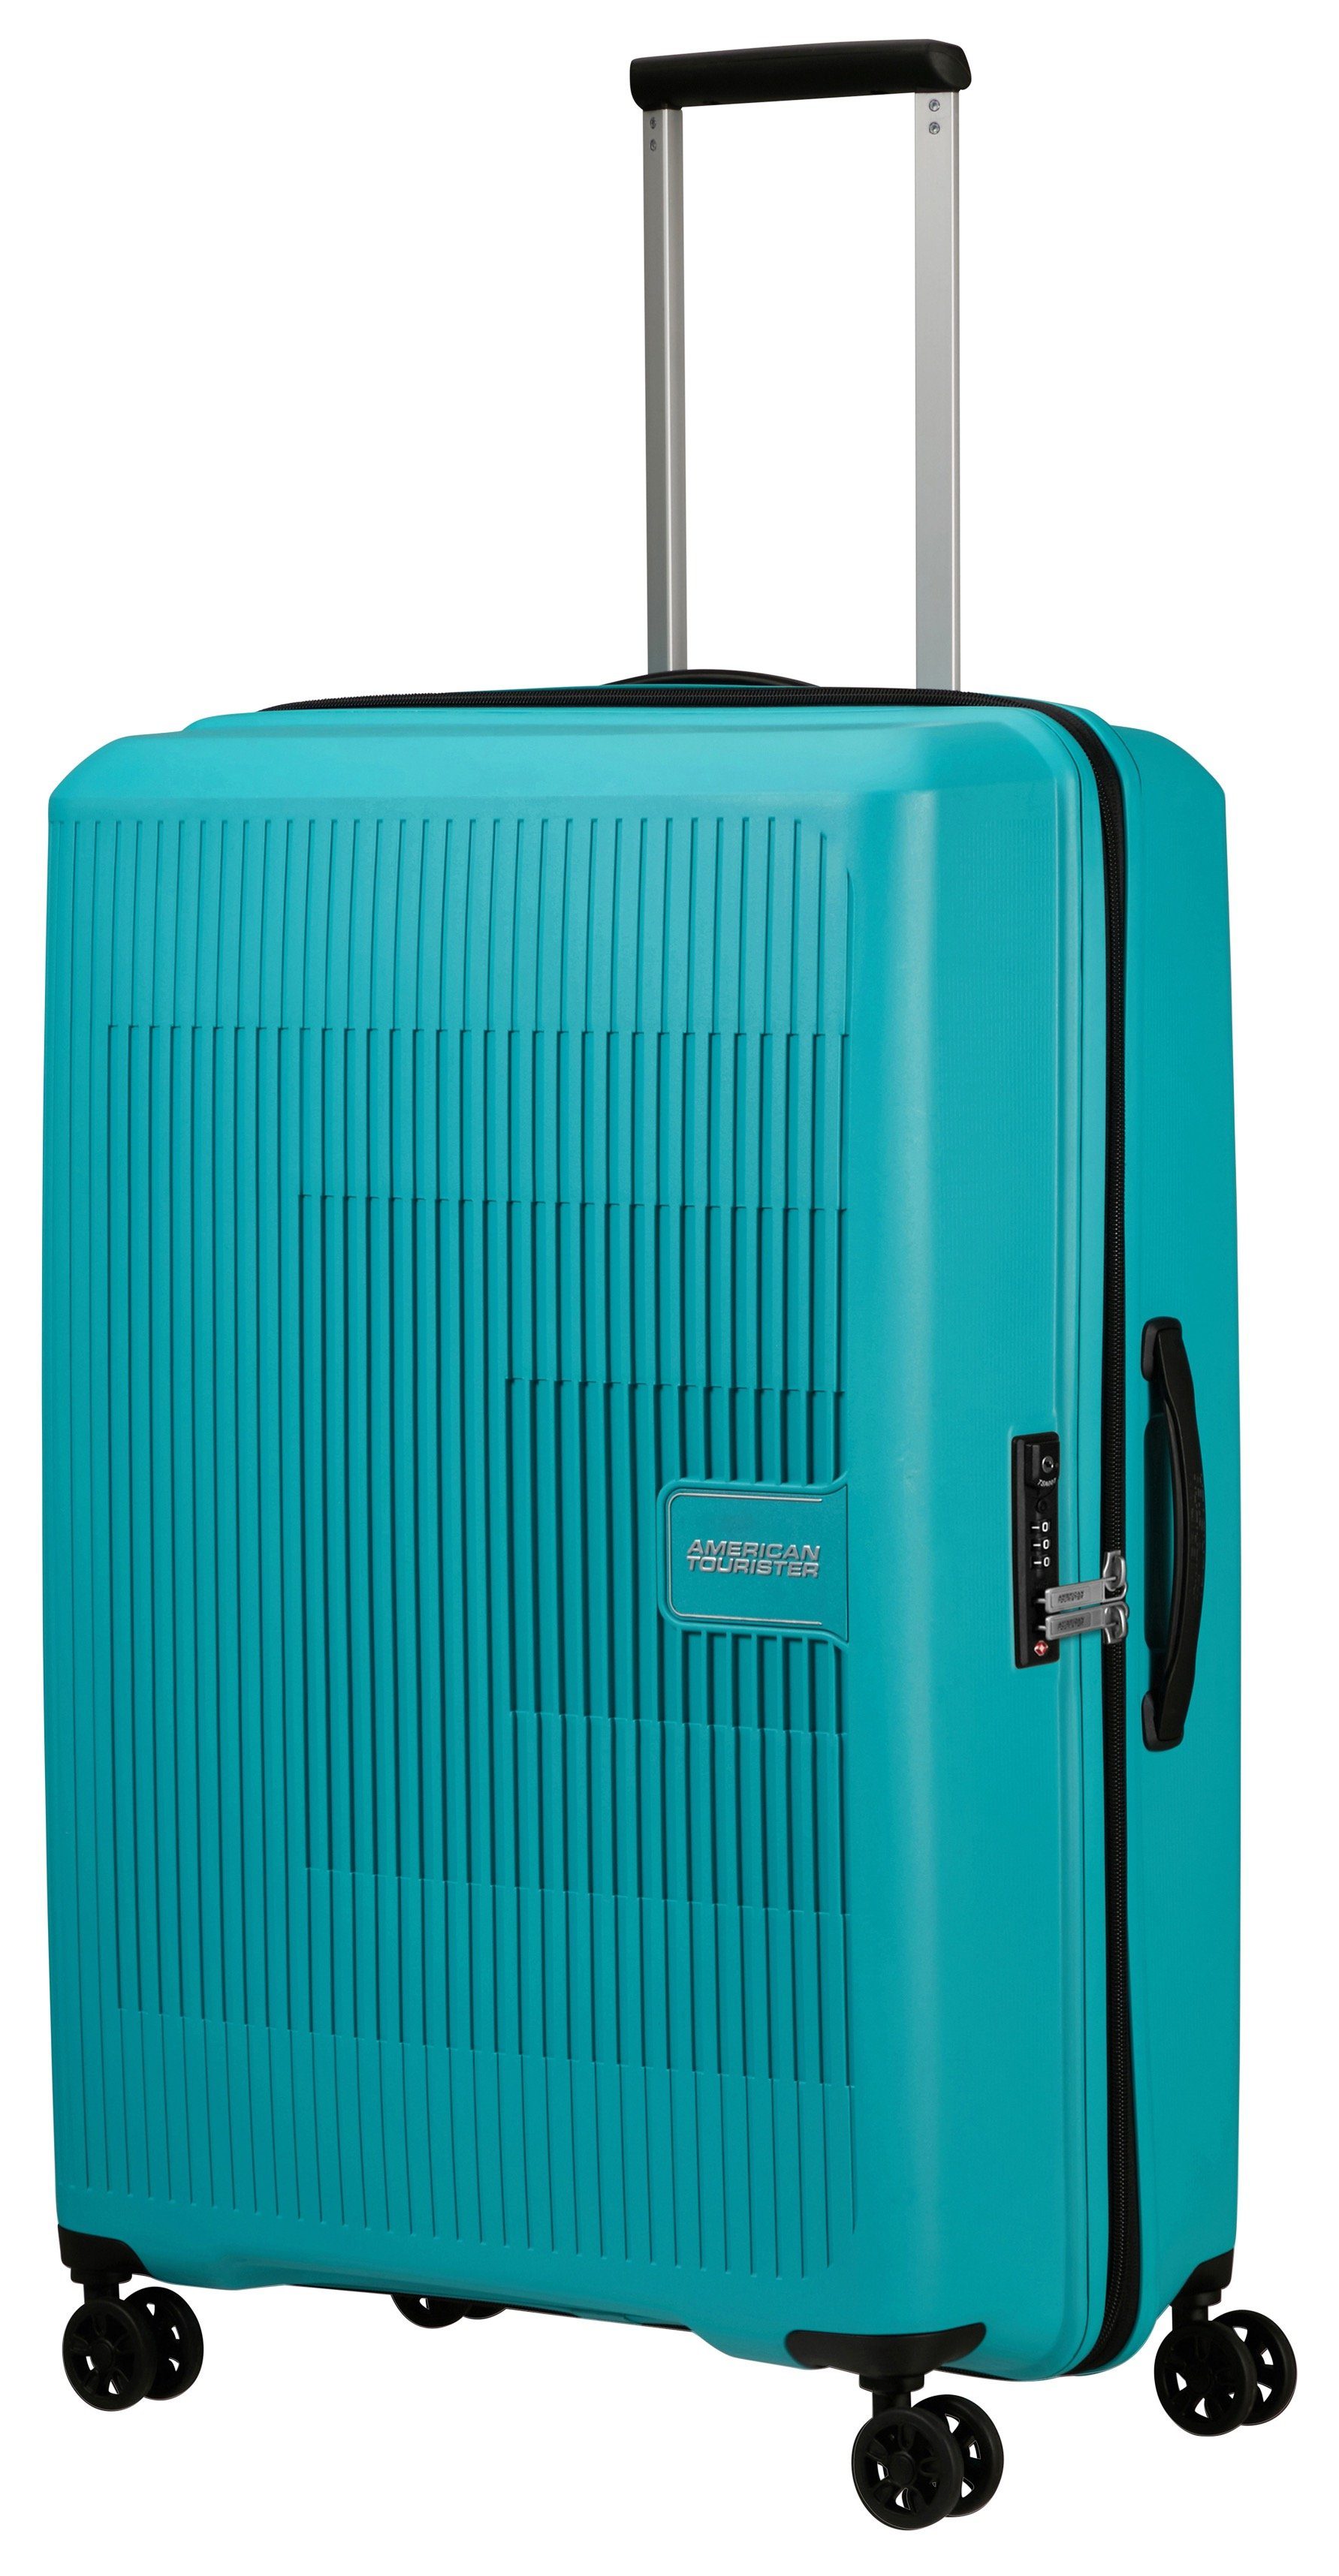 AEROSTEP Spinner 77 4 tonic American Rollen exp, Koffer turquoise Tourister®